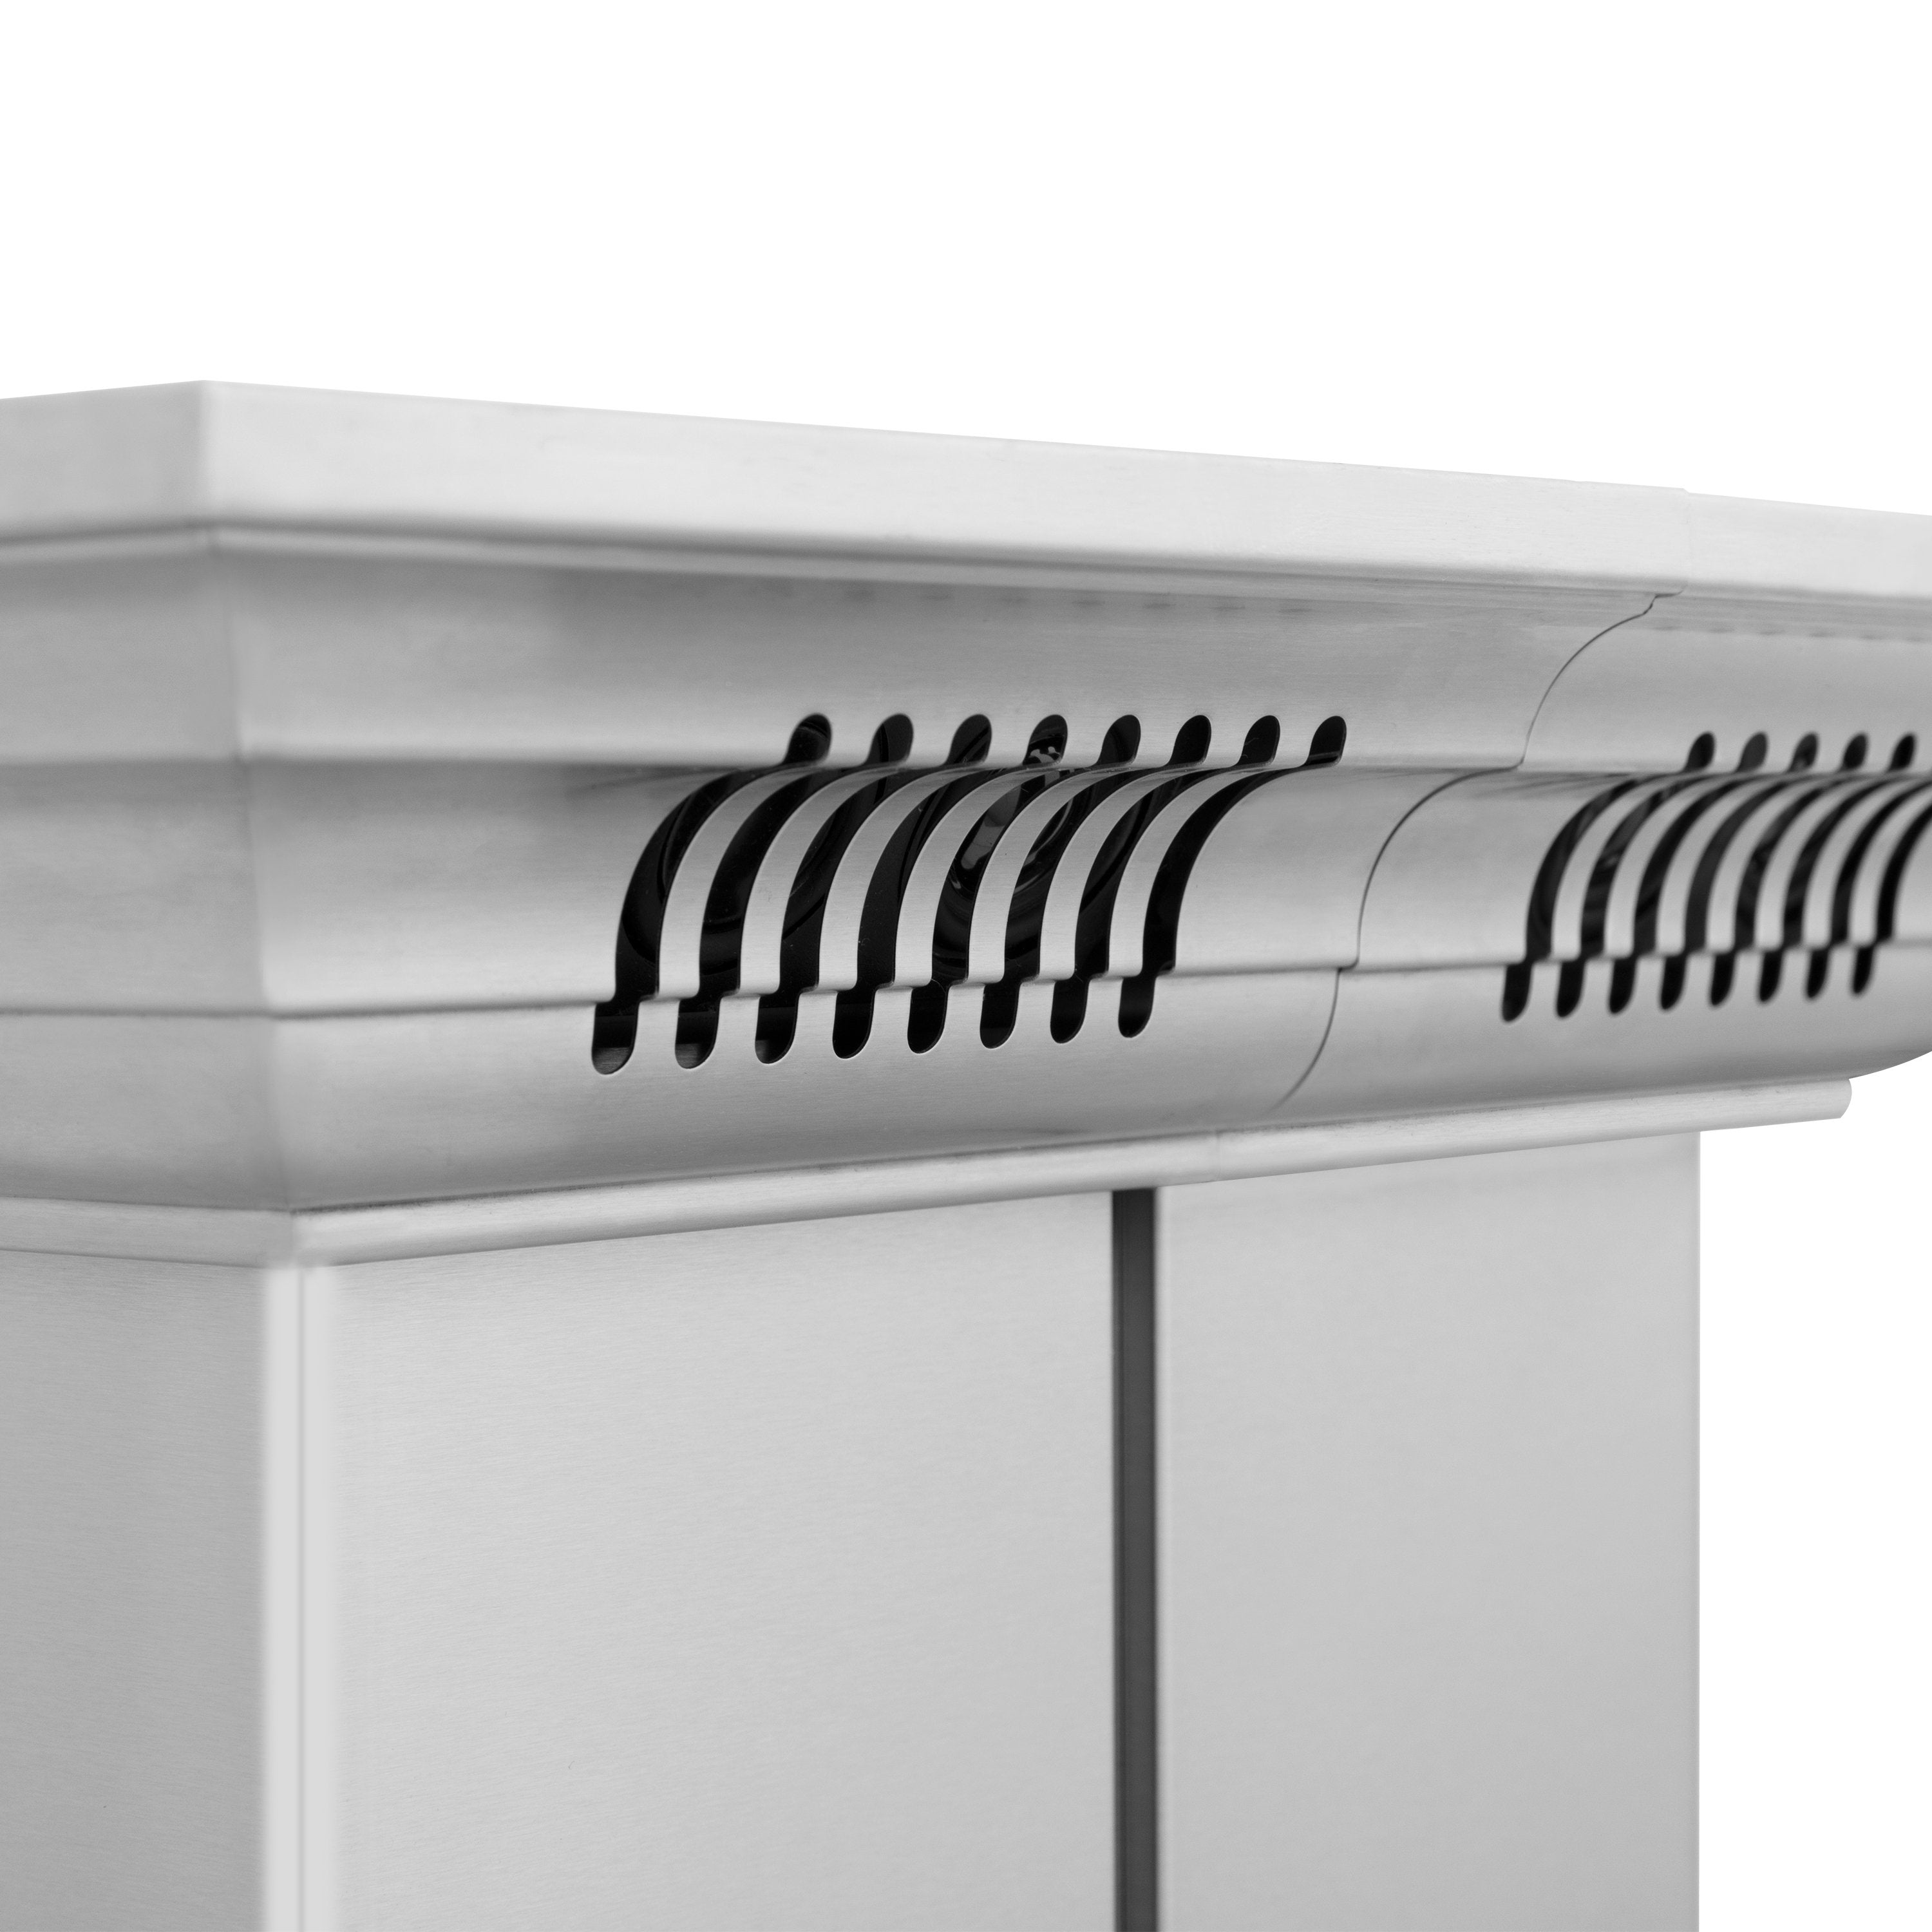 42" ZLINE CrownSound√∞ Ducted Vent Island Mount Range Hood in Stainless Steel with Built-in Bluetooth Speakers (KE2iCRN-BT-42)